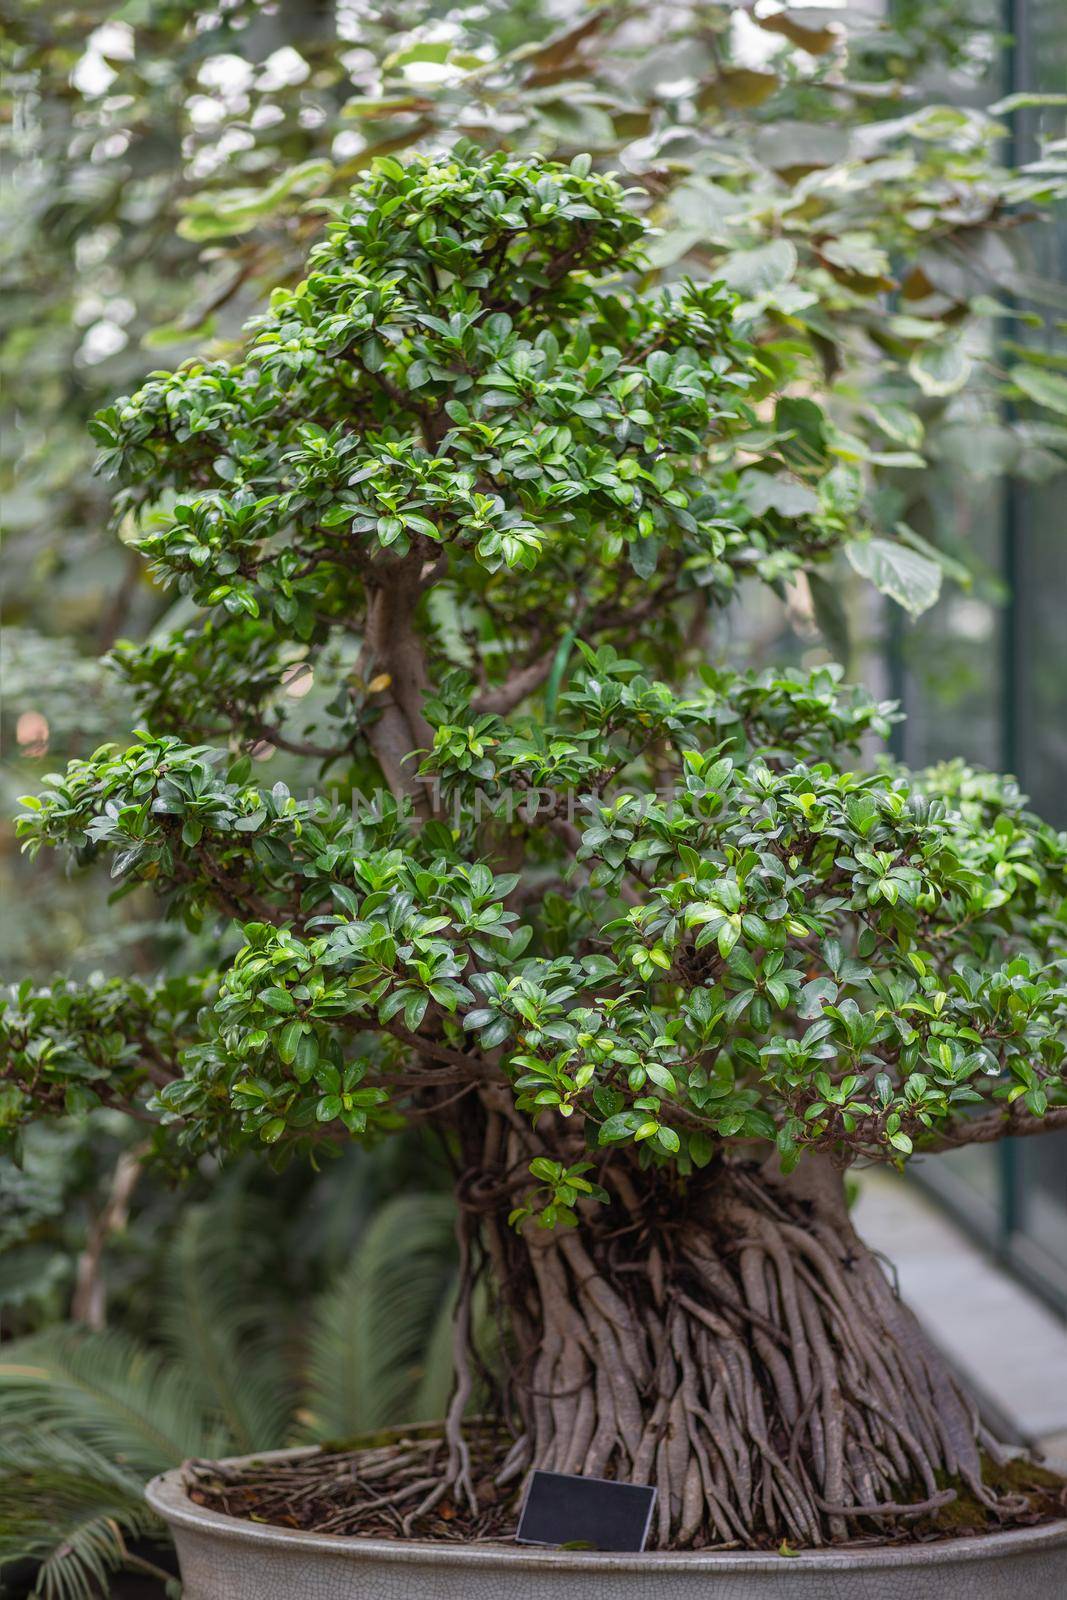 Ficus which looks like bonsai tree. Growing exotic plants as botanical hobby.